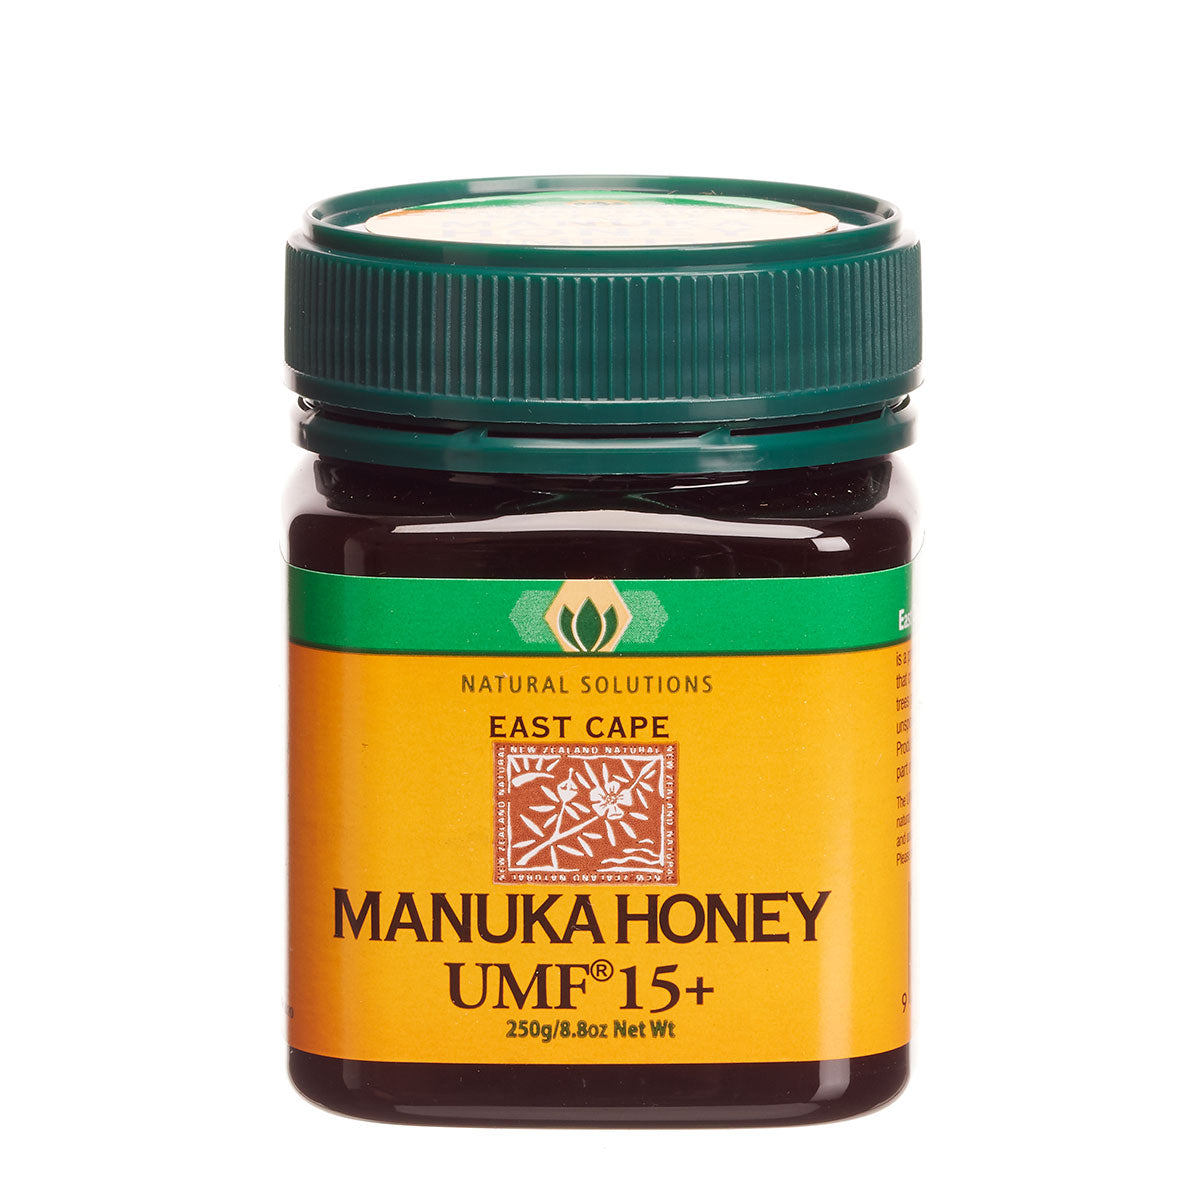 Honey is both a food and a natural drugstore - especially Manuka honey